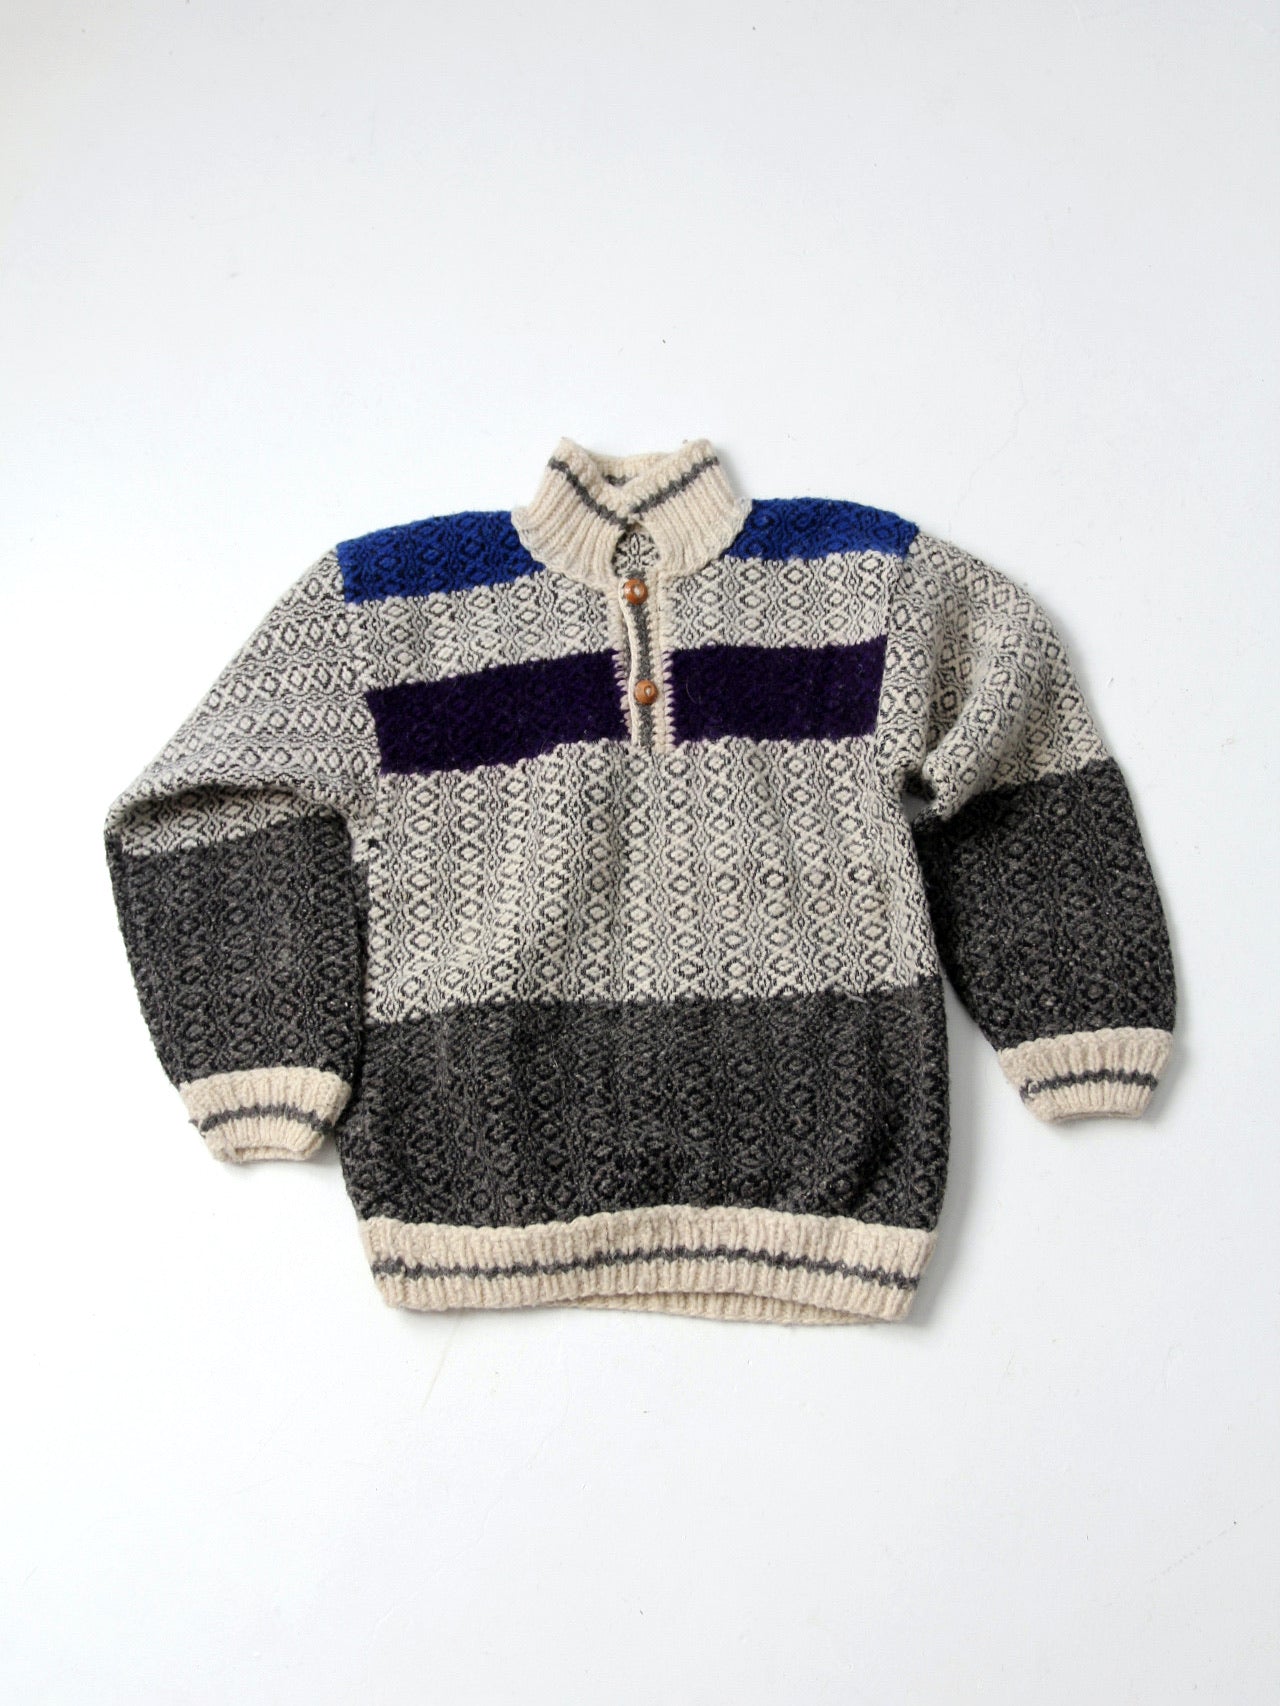 vintage hand knit Norwegian style sweater